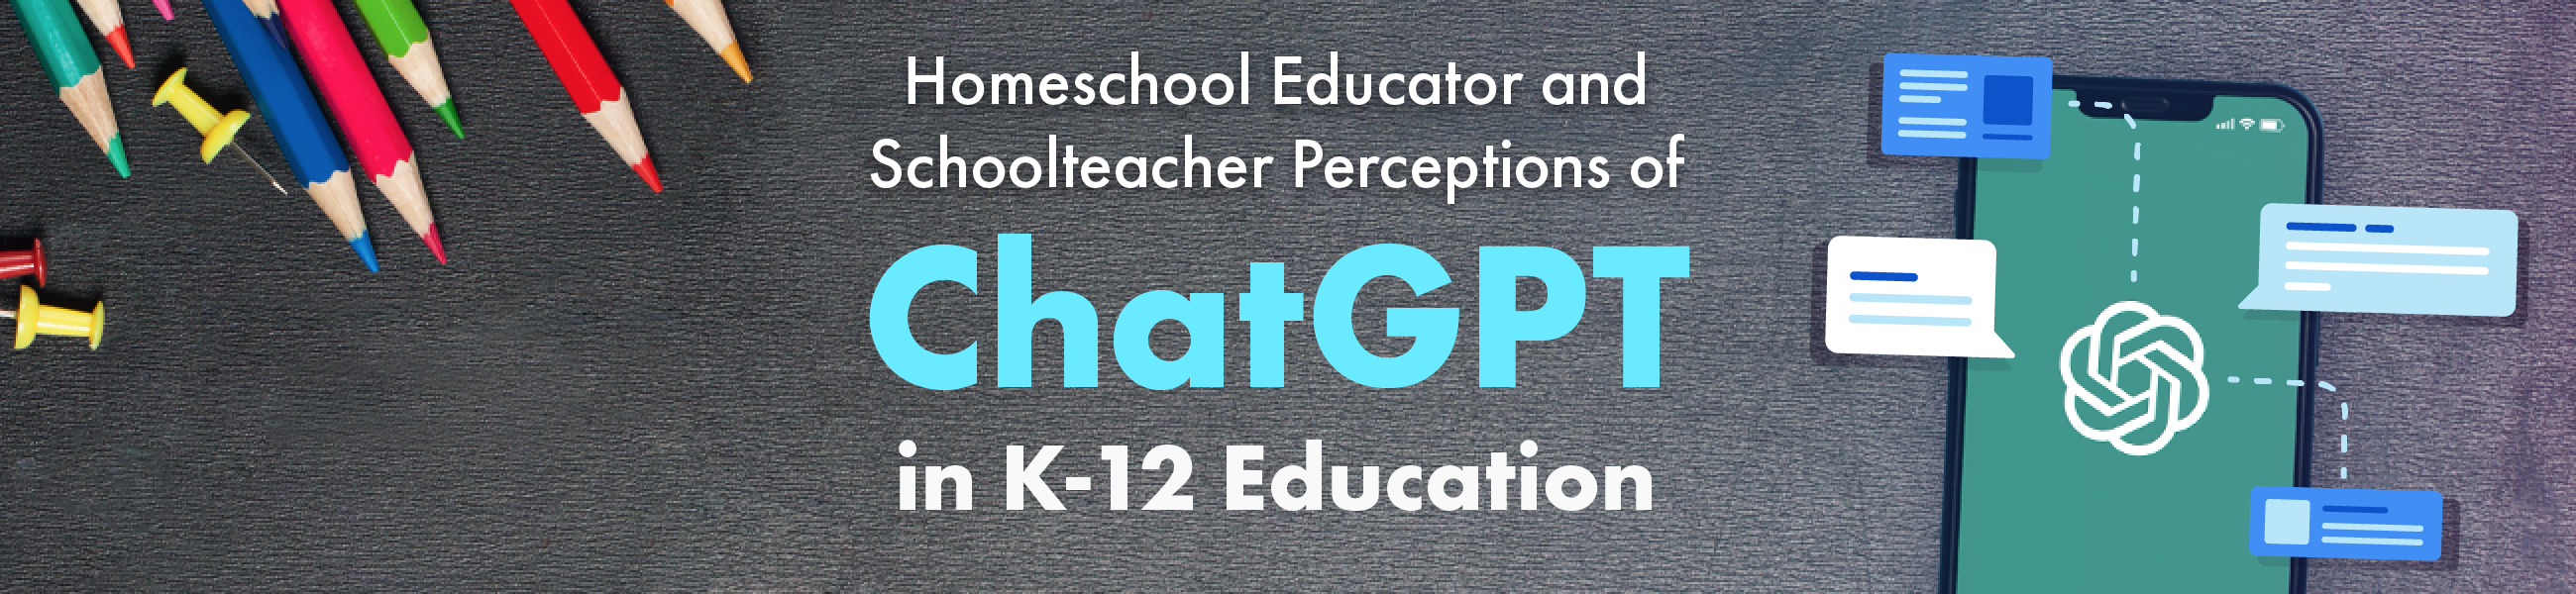 Chat GPT in K-12 Education. 